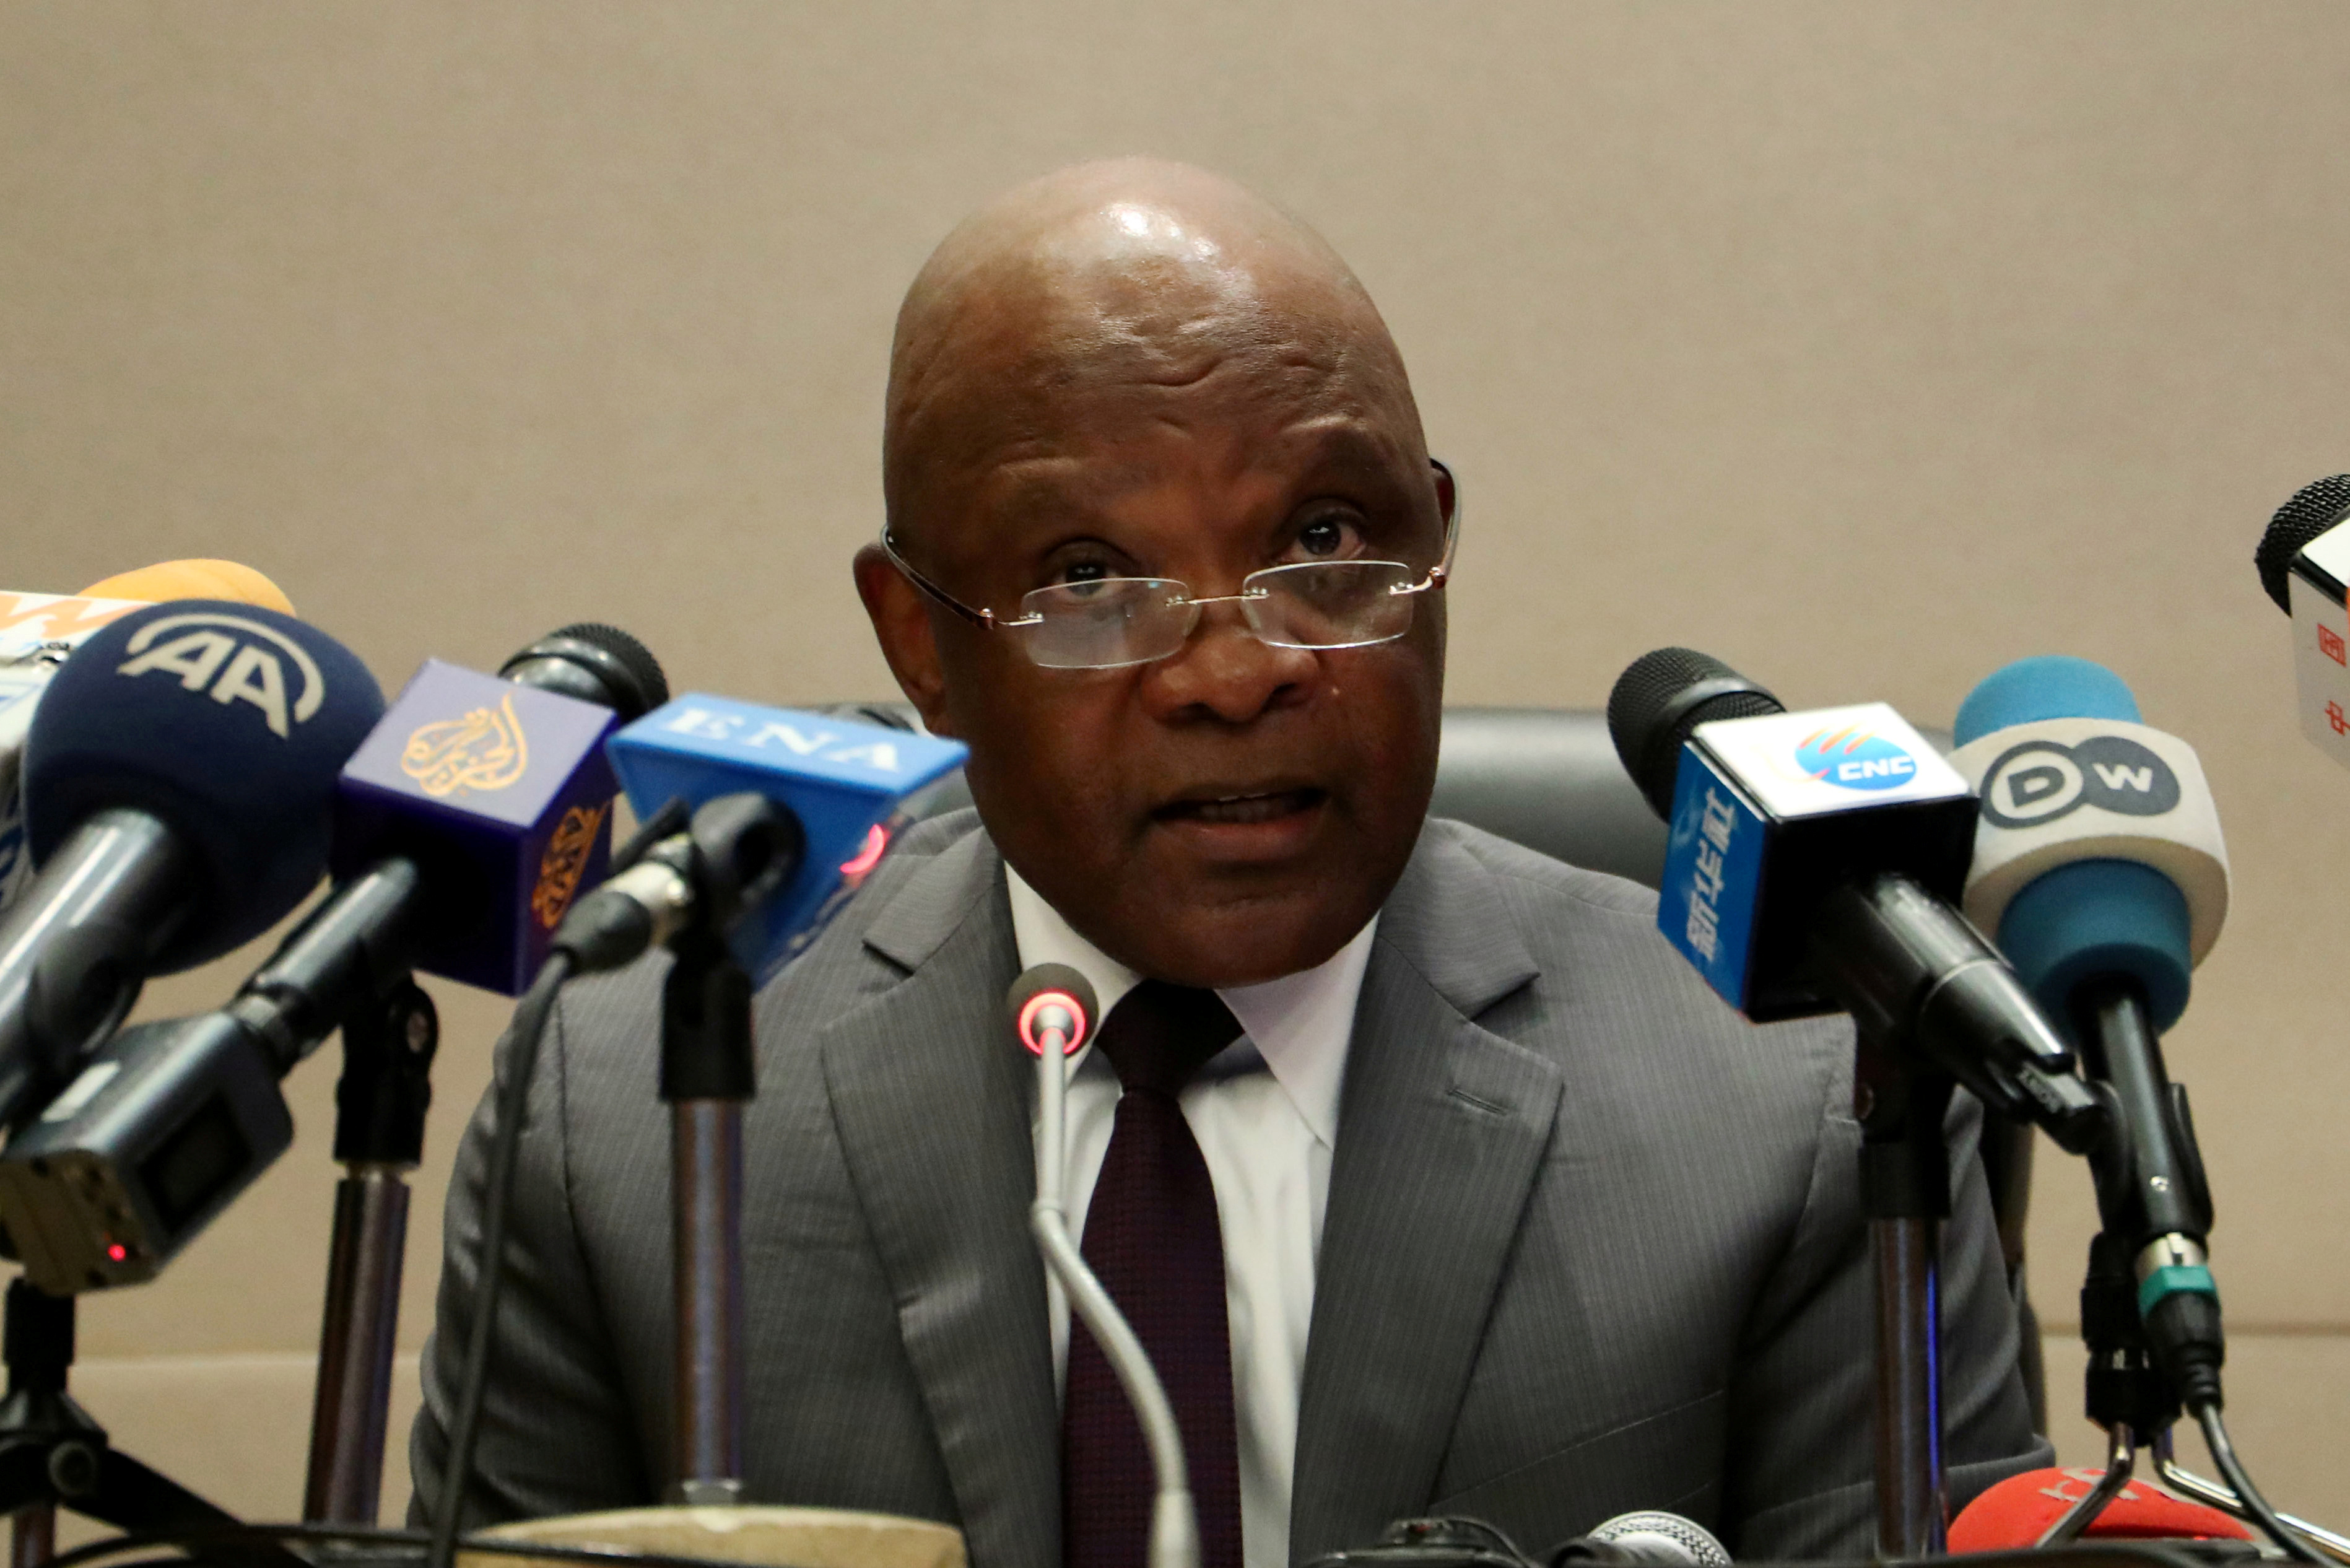 John Nkengasong, Africa’s Director of Centers for Disease Control (CDC), speaks during a news conference on coronavirus at the African Union Headquarters in Addis Ababa